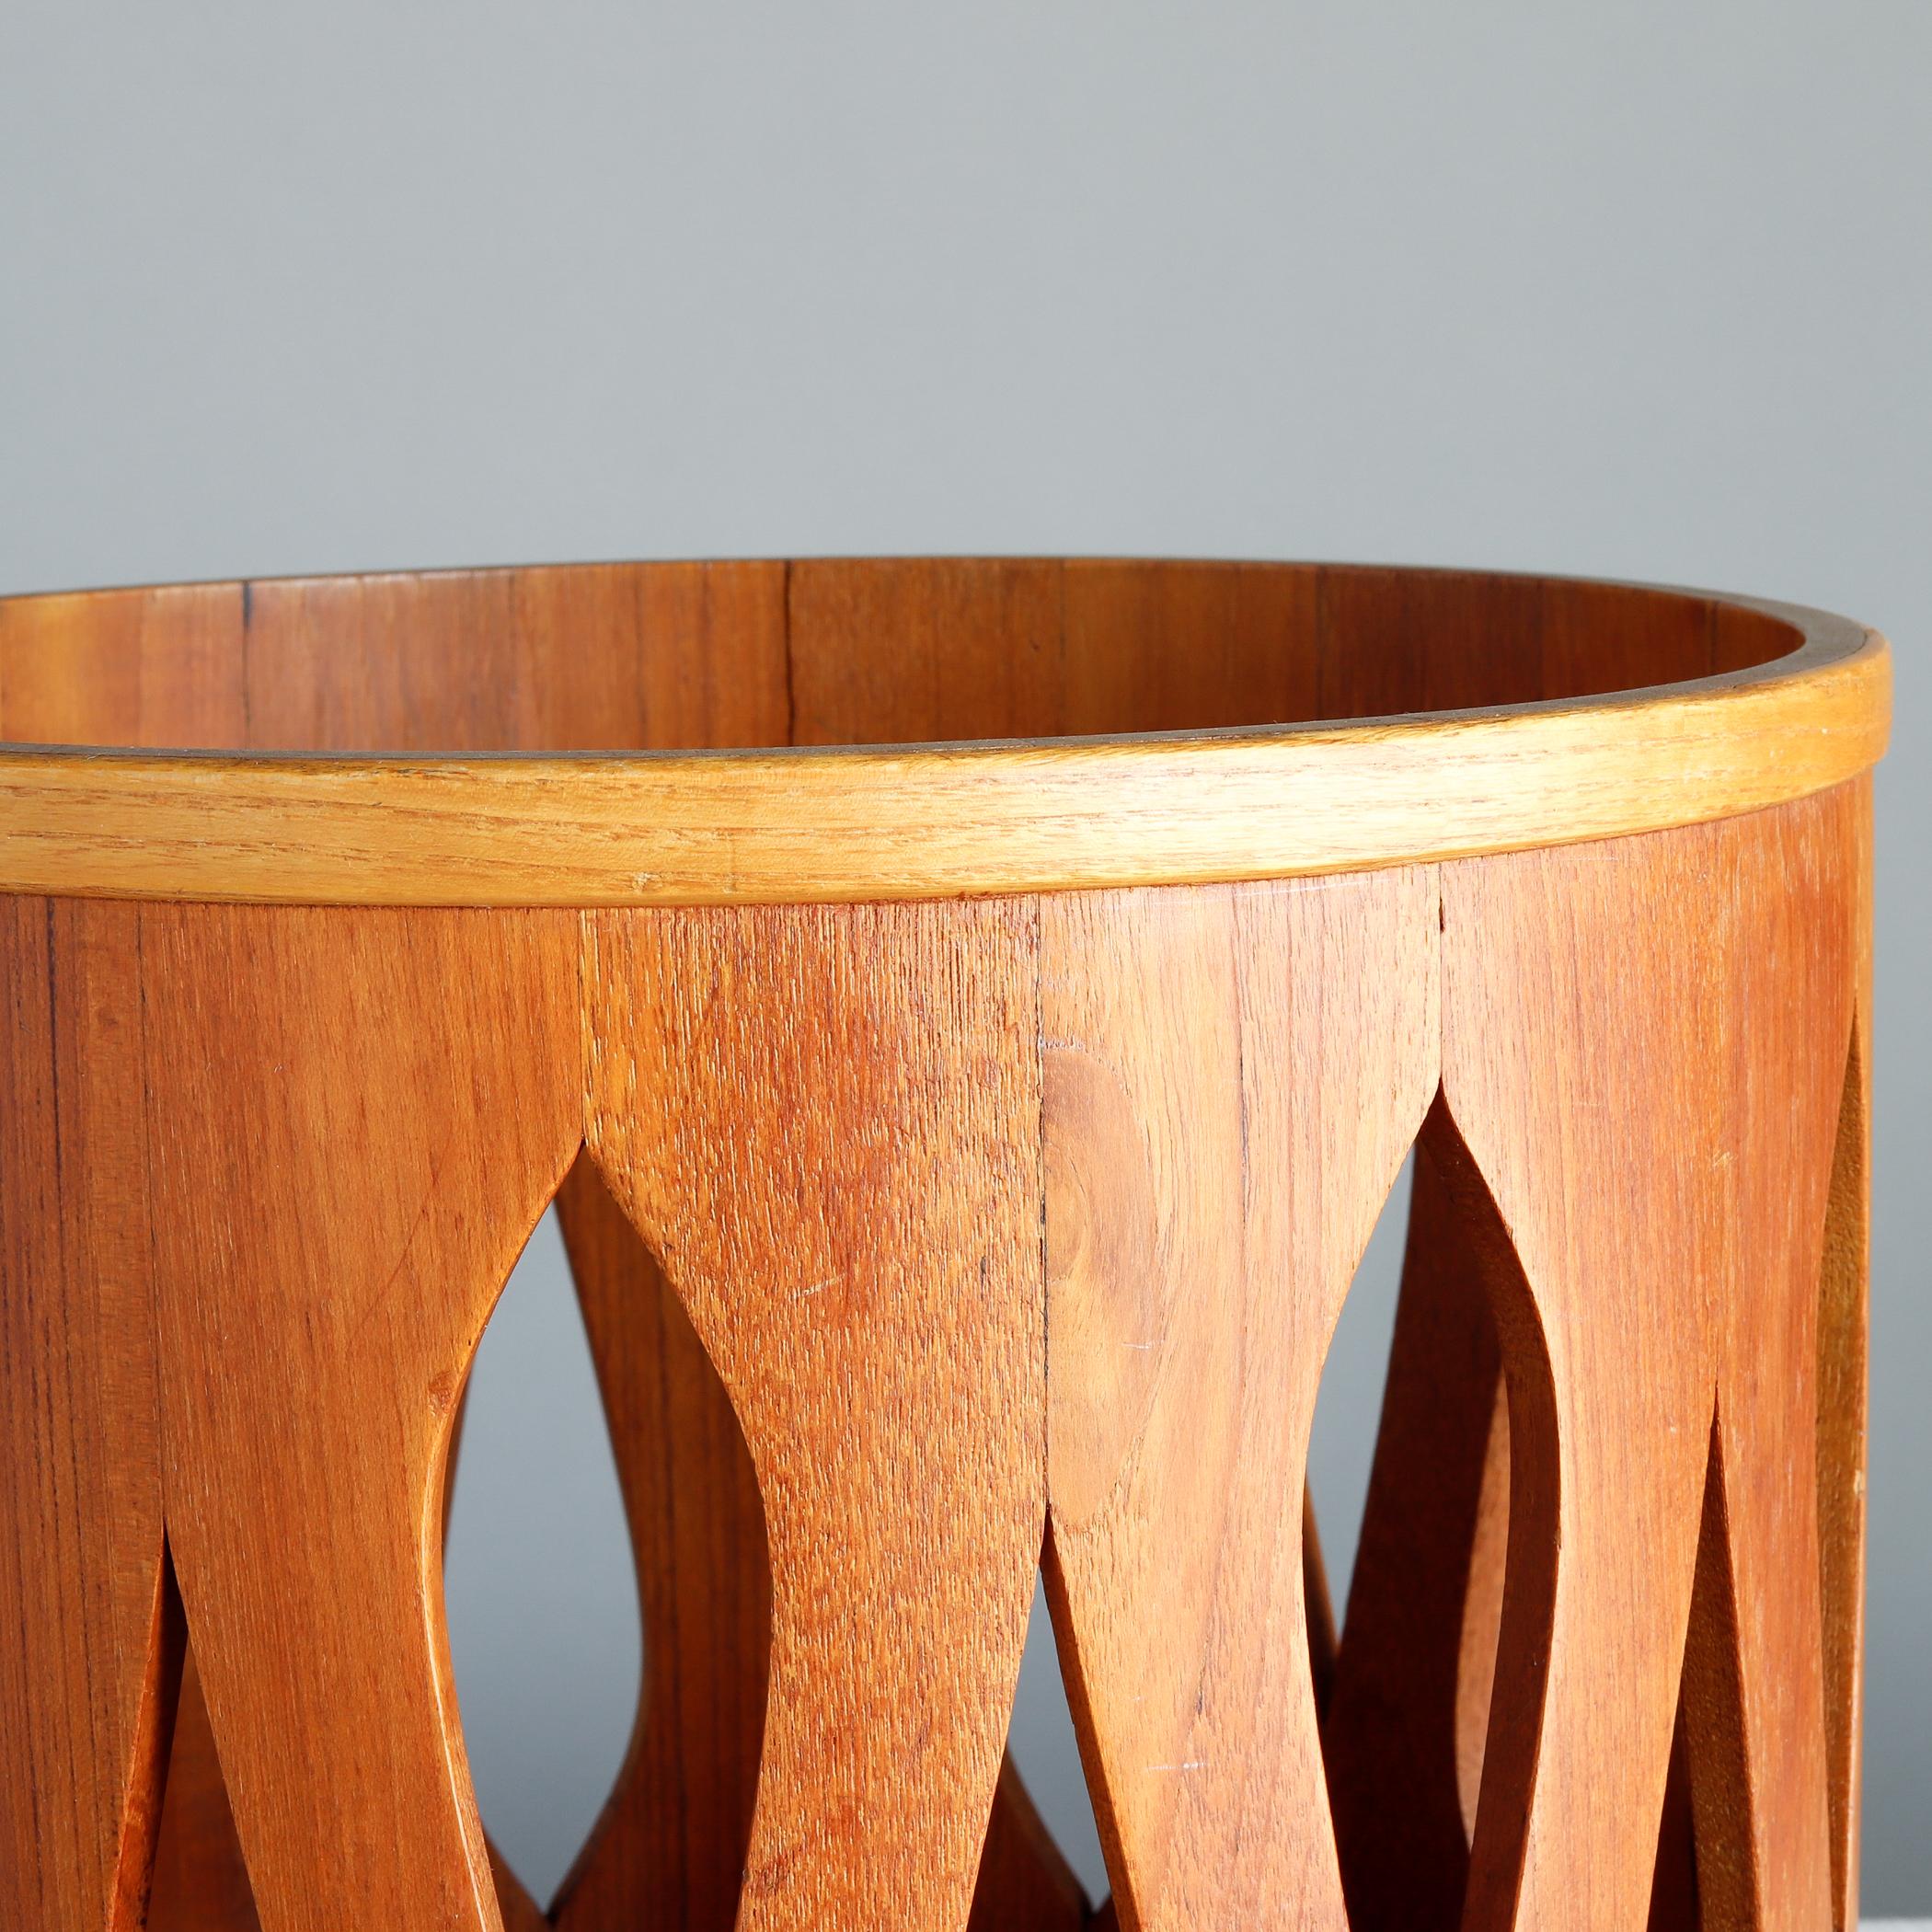 Staved teak waste paper basket designed by Jens Quistgaard for Dansk. Made in Denmark, circa 1958. In a period newspaper article, it was noted that this 'teak stool can double up as a table or be turned upside down as a wastepaper